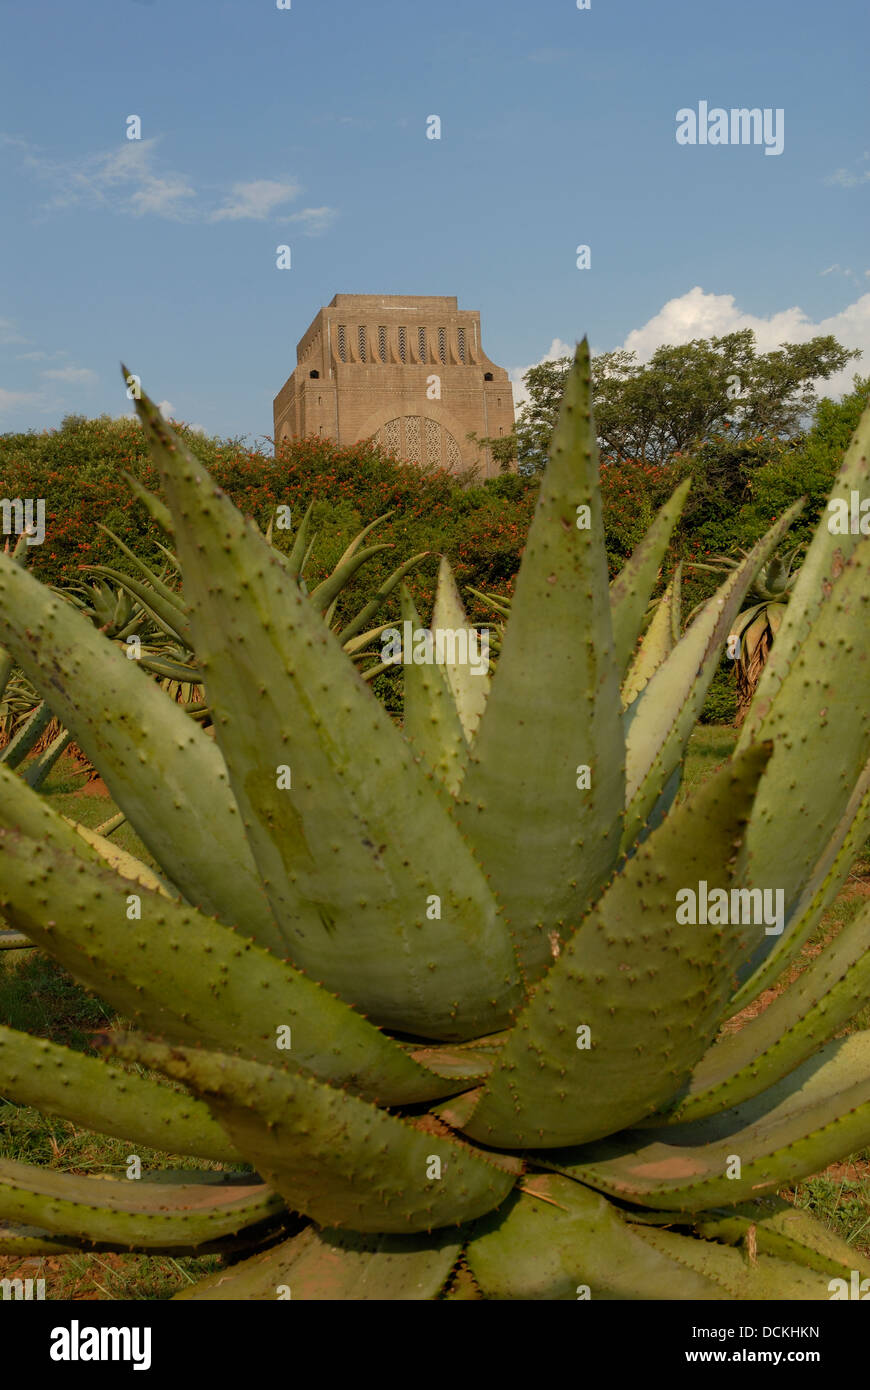 South Africa, Pretoria, 2009. The Voortrekker Monument. Stock Photo